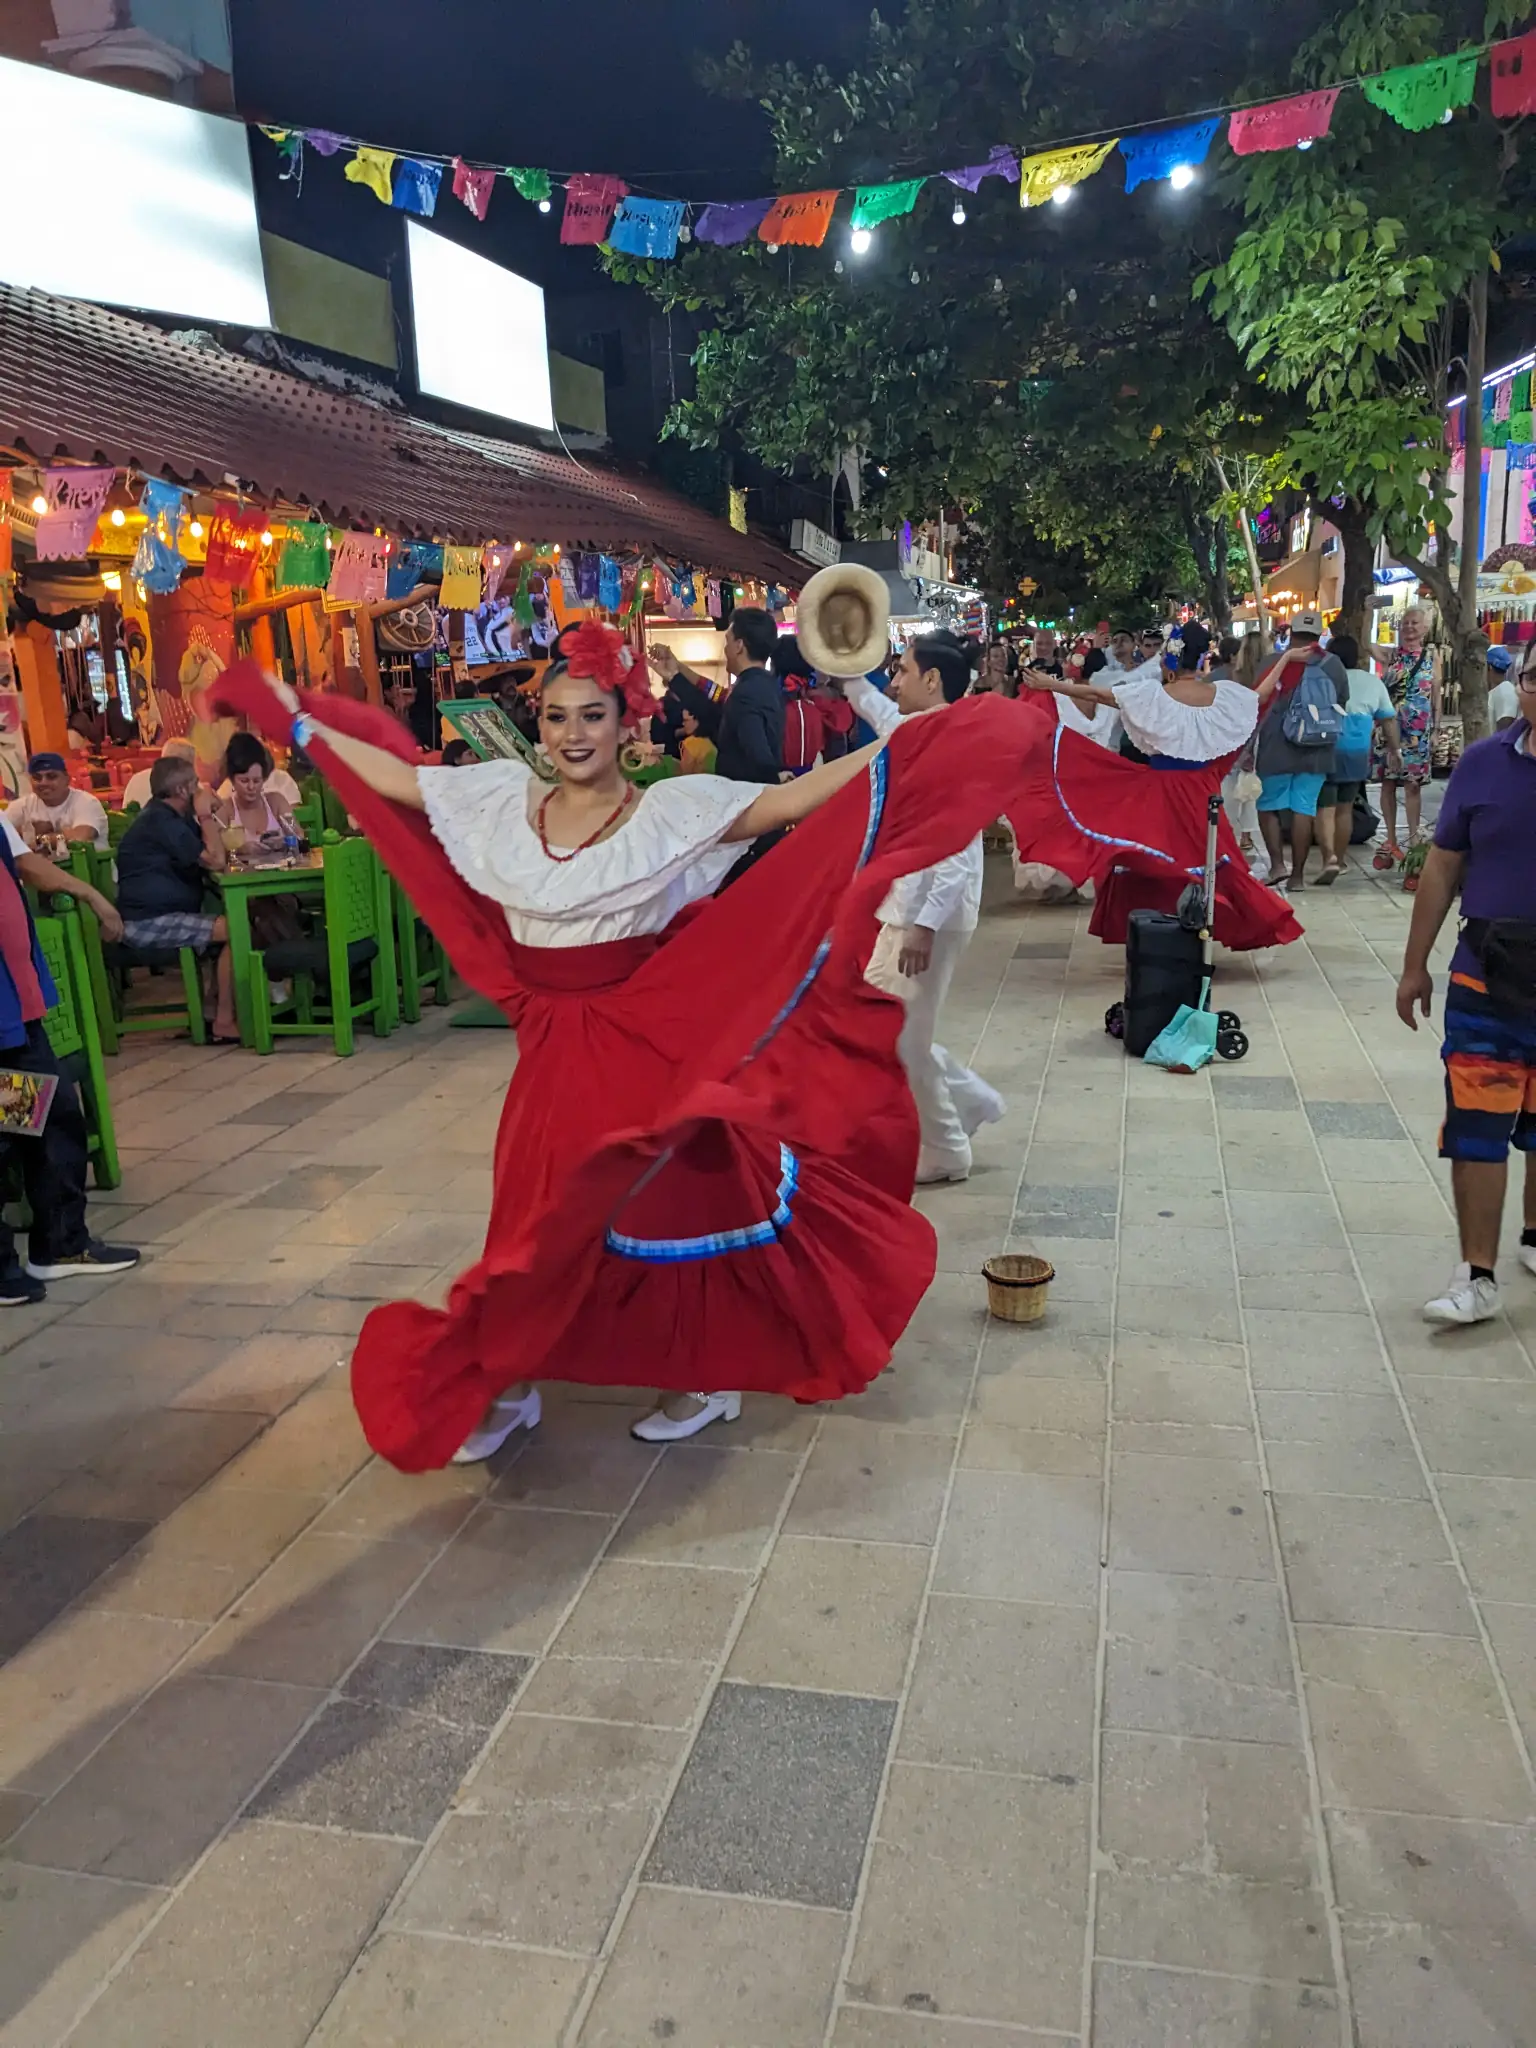 Street performers in red, dancing in the streets of Carmen del Play.